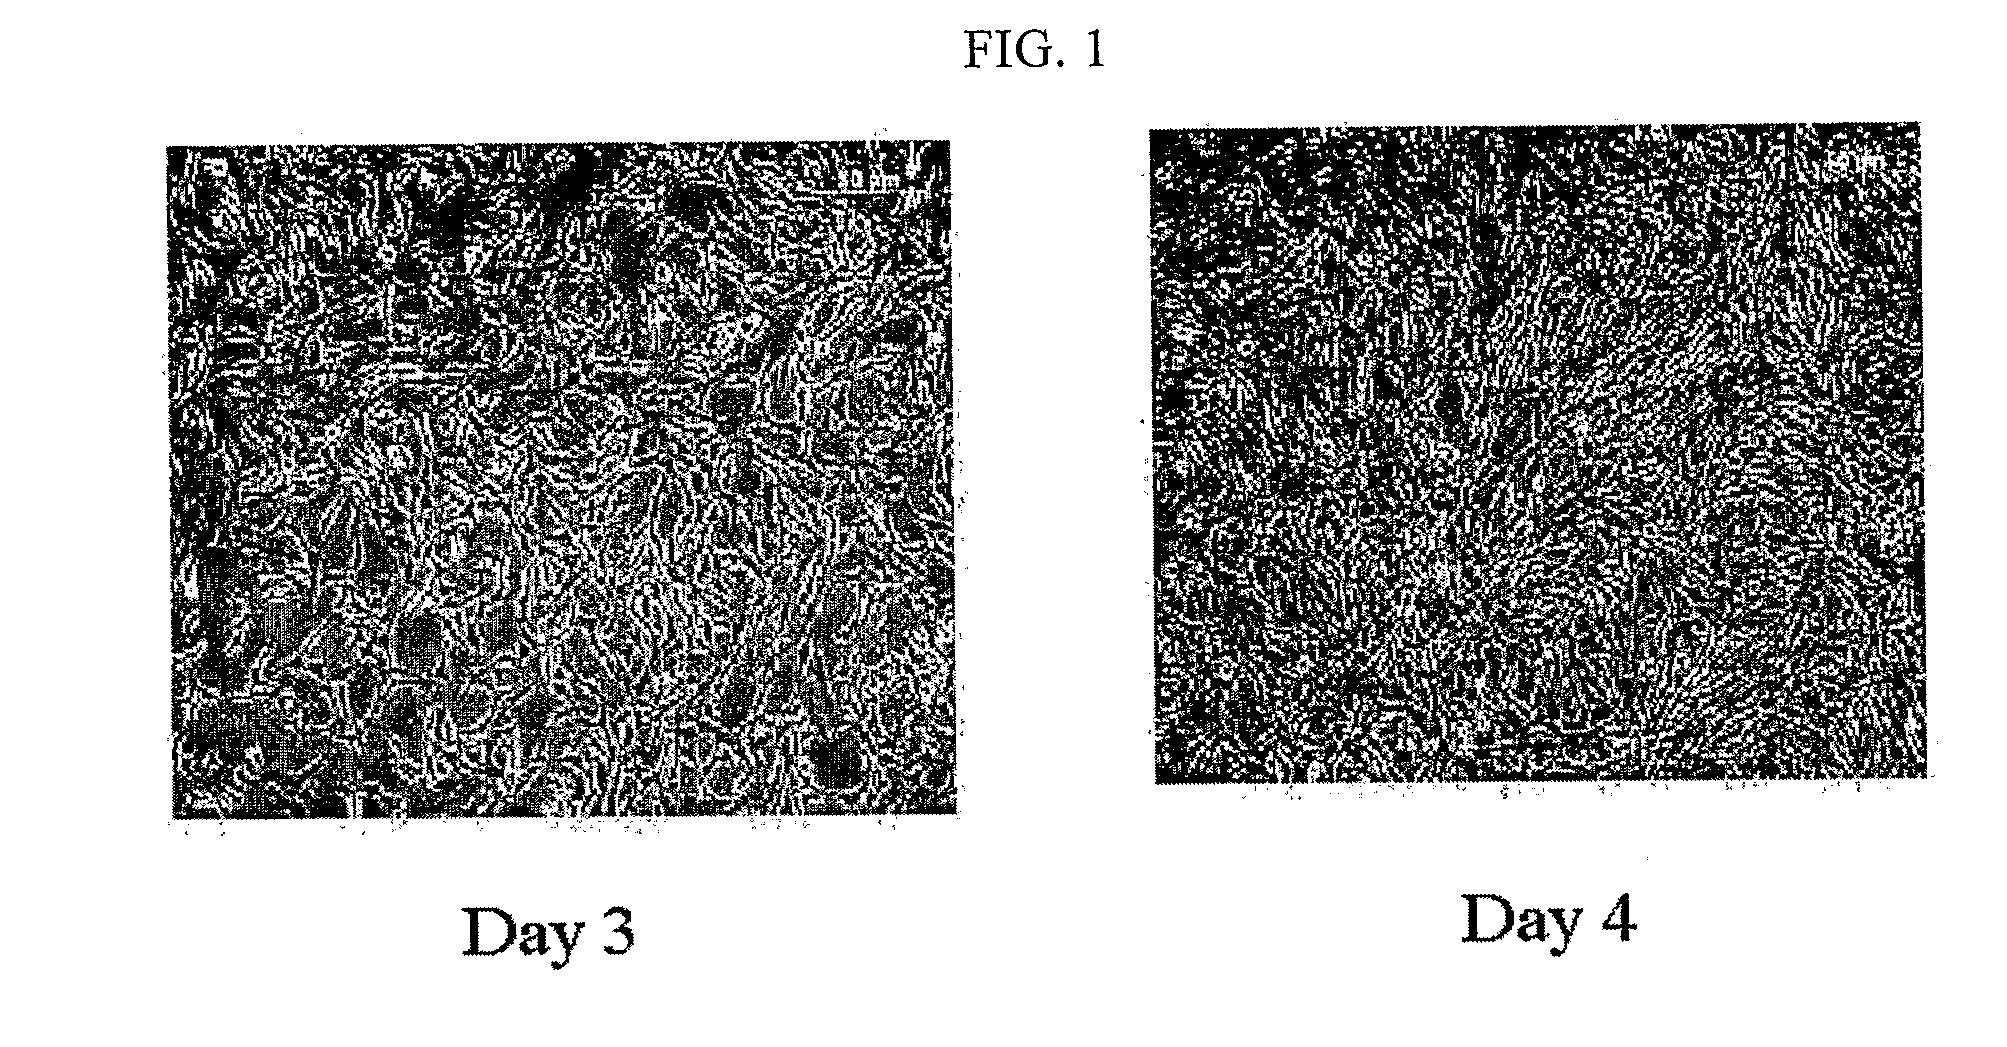 Composition for treating ischemic limb disease comprising stem cells derived from adipose tissue